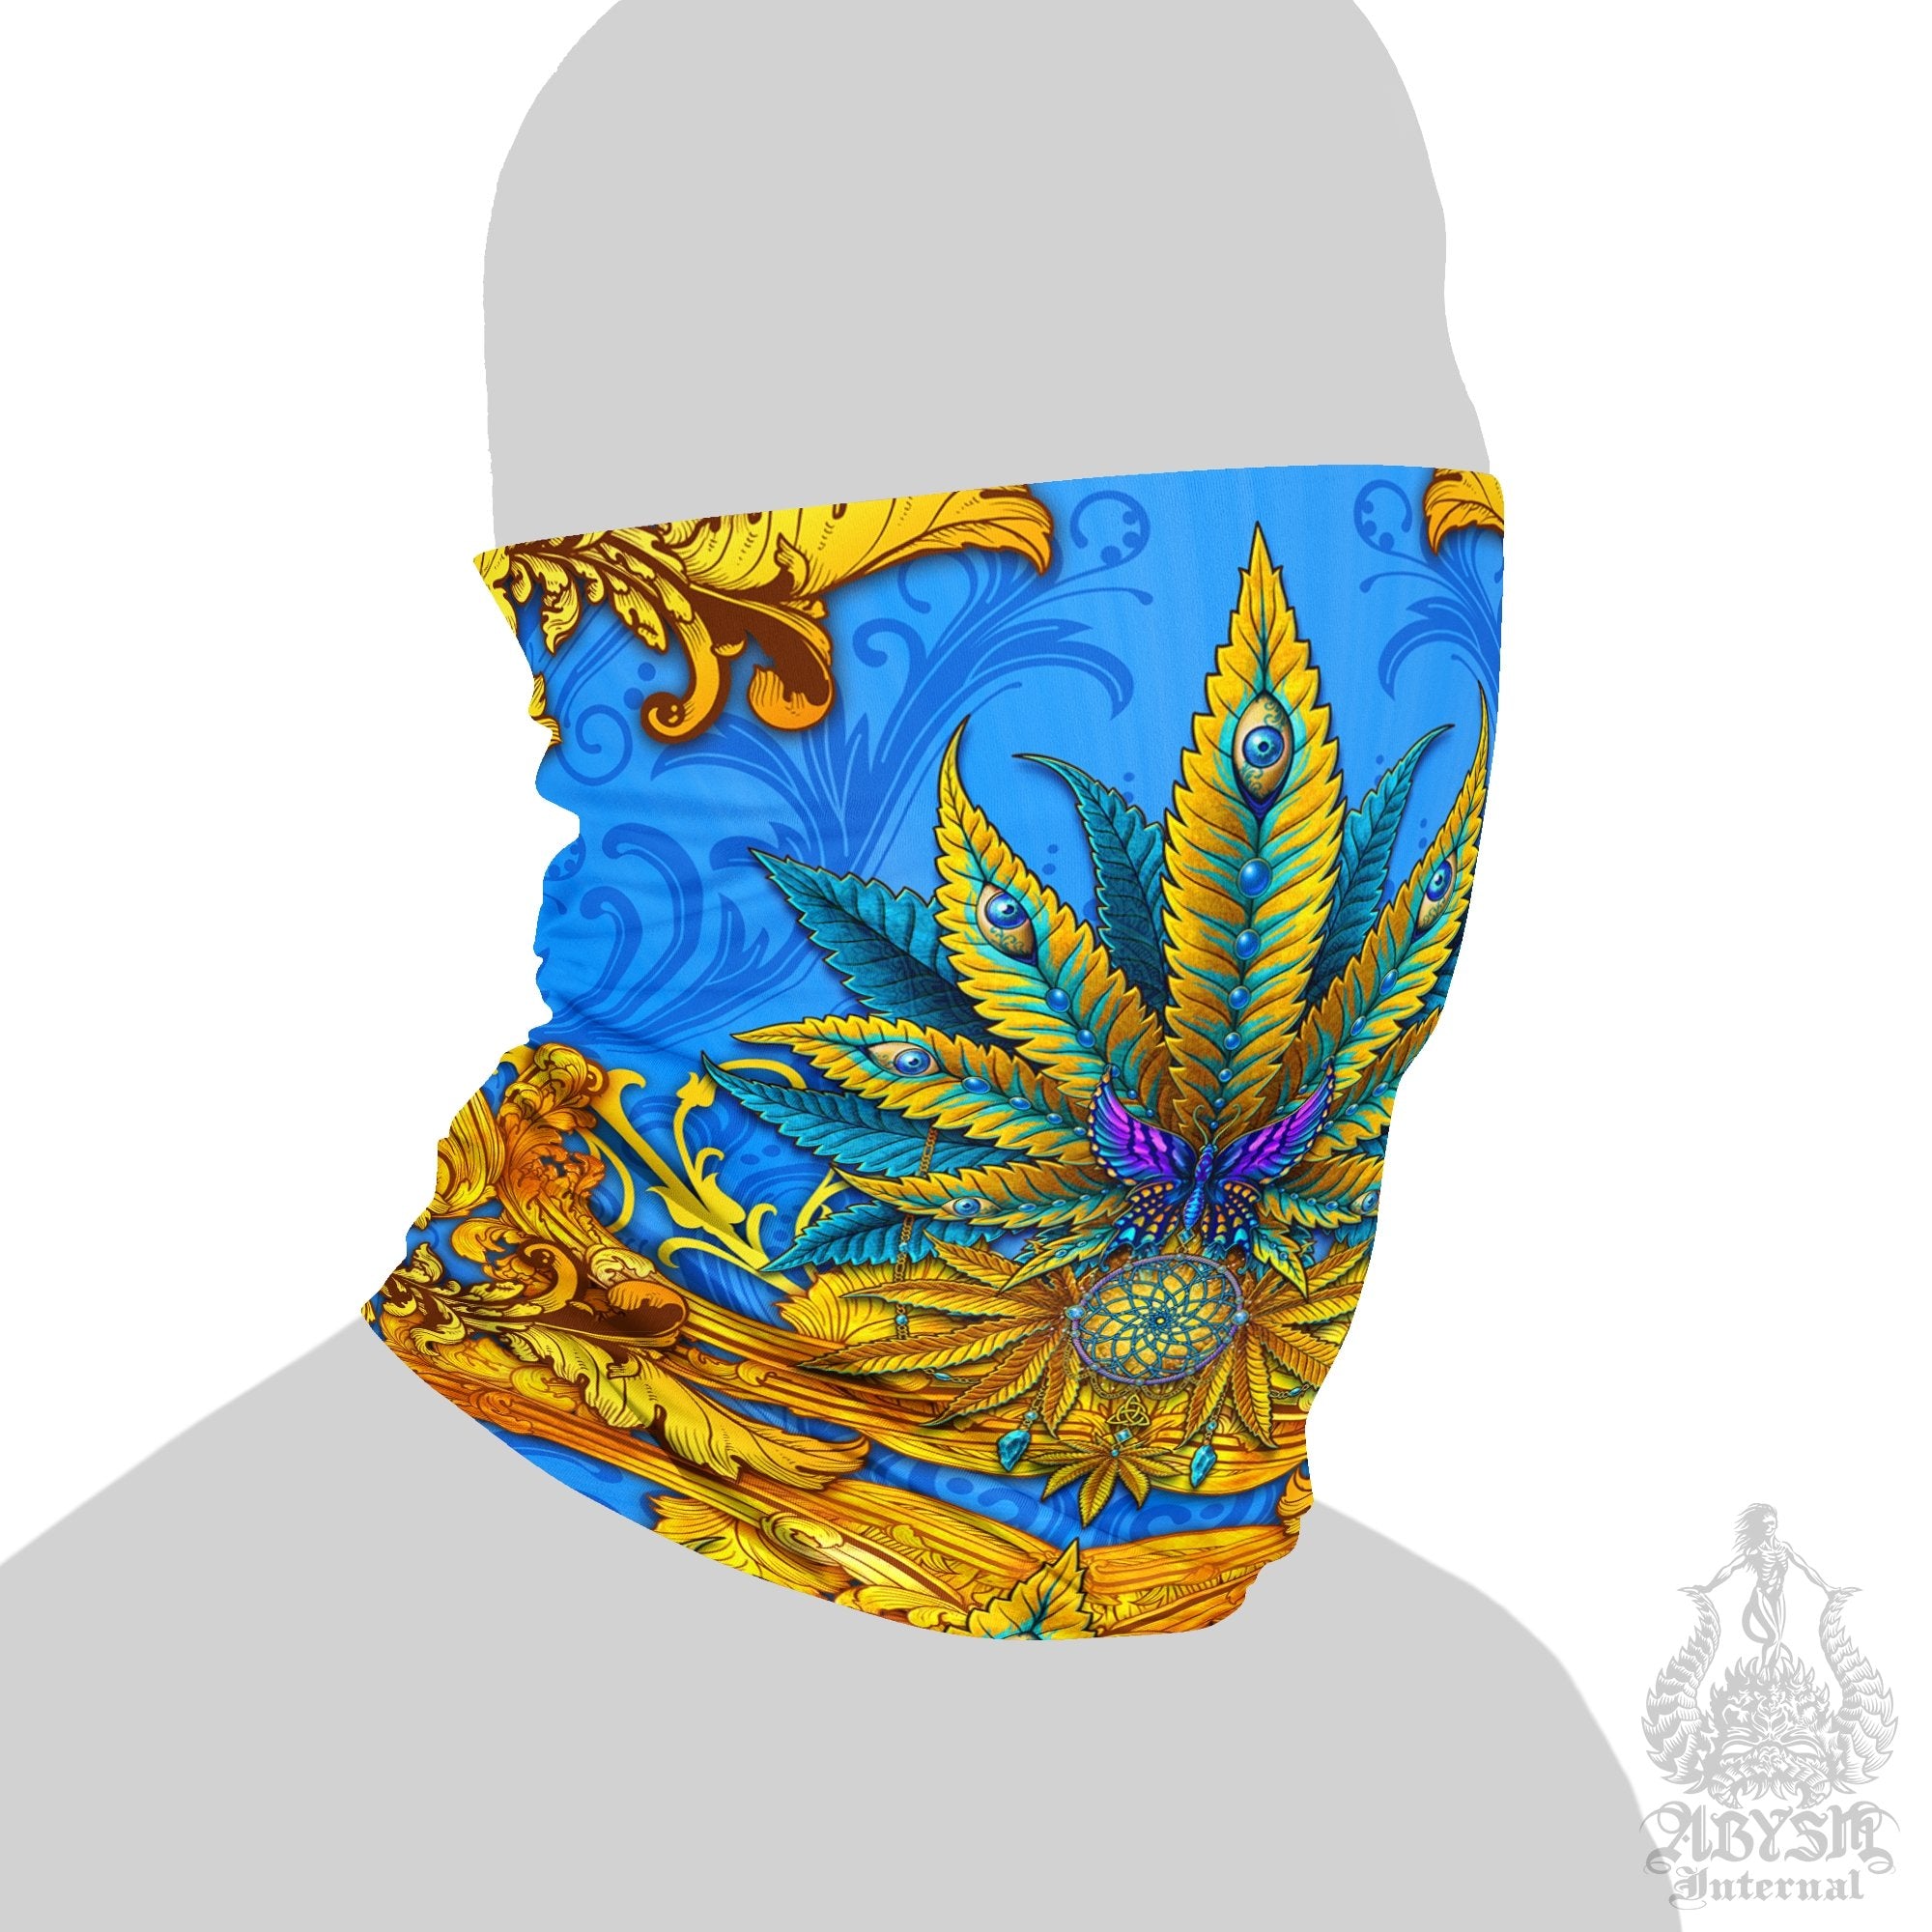 Weed Neck Gaiter, Cannabis Face Mask, Marijuana Head Covering, Hippie Festival Outfit, 420 Gift - Cyan and Gold - Abysm Internal